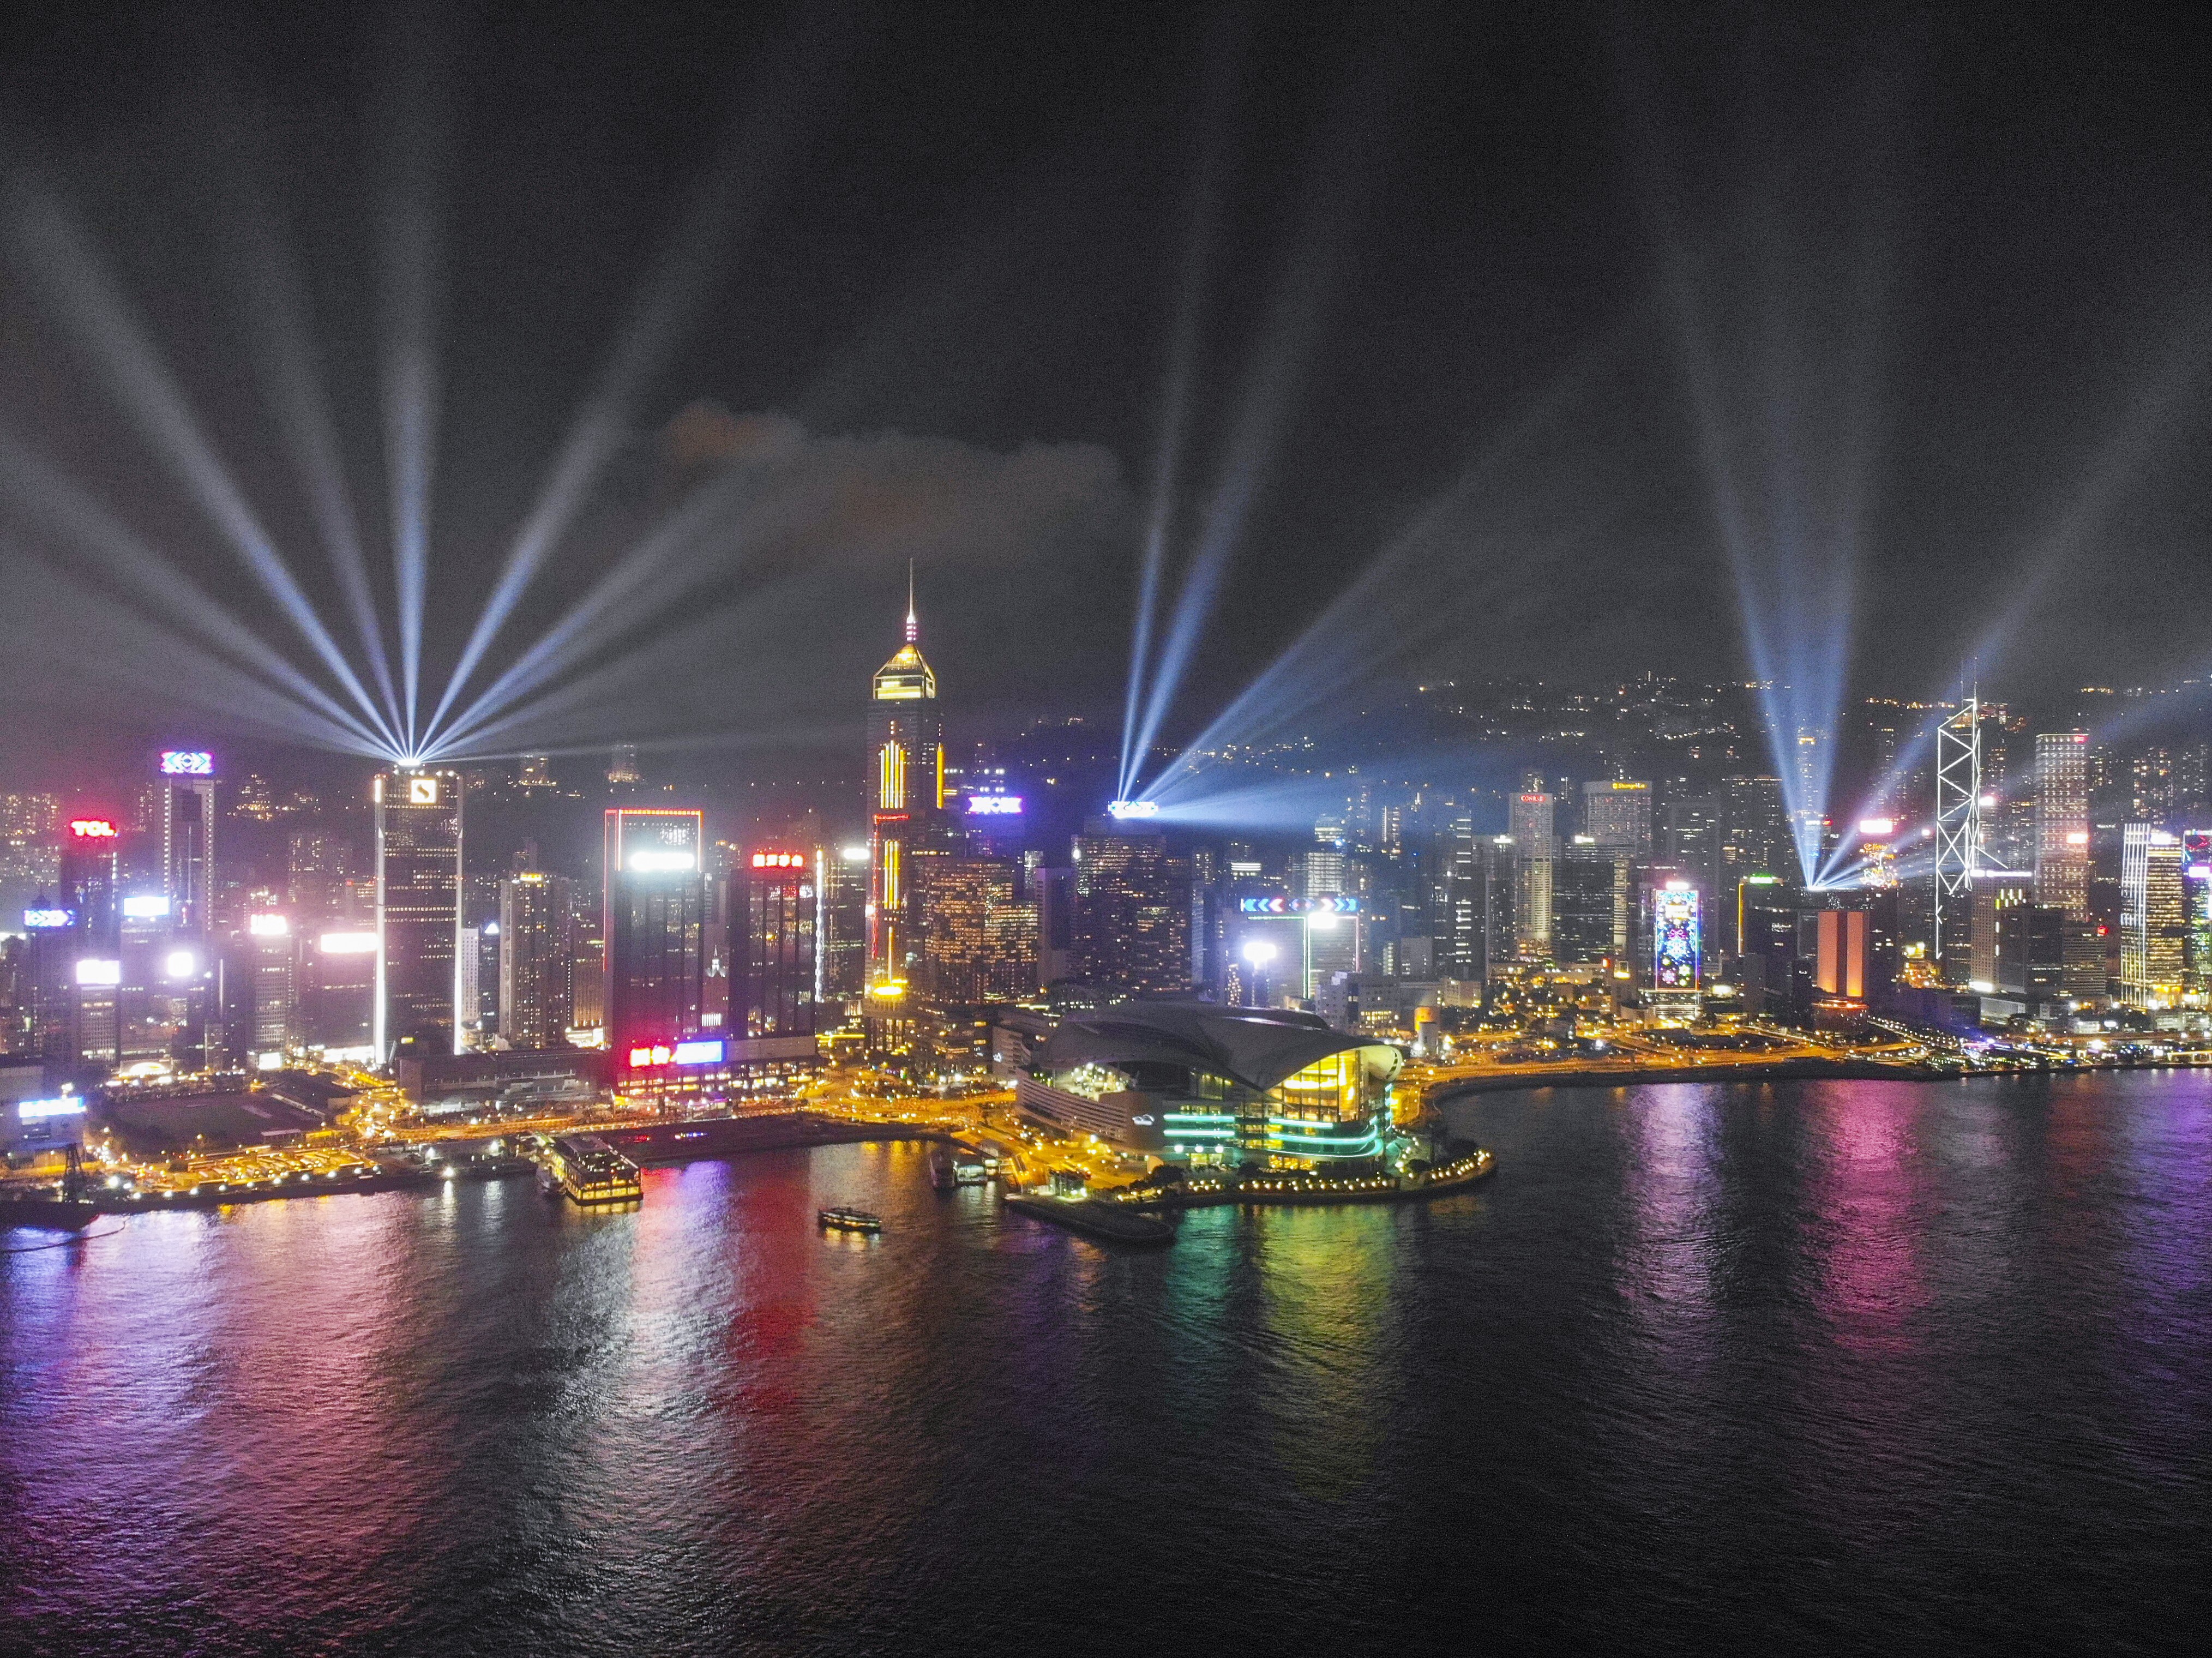 Hong Kong’s Symphony of Lights laser show still plays every night at 8pm despite tourists being at an all-time low, a situation questioned by artist Mark Chung in his residency at de Sarthe Gallery this month. Photo: Martin Chan